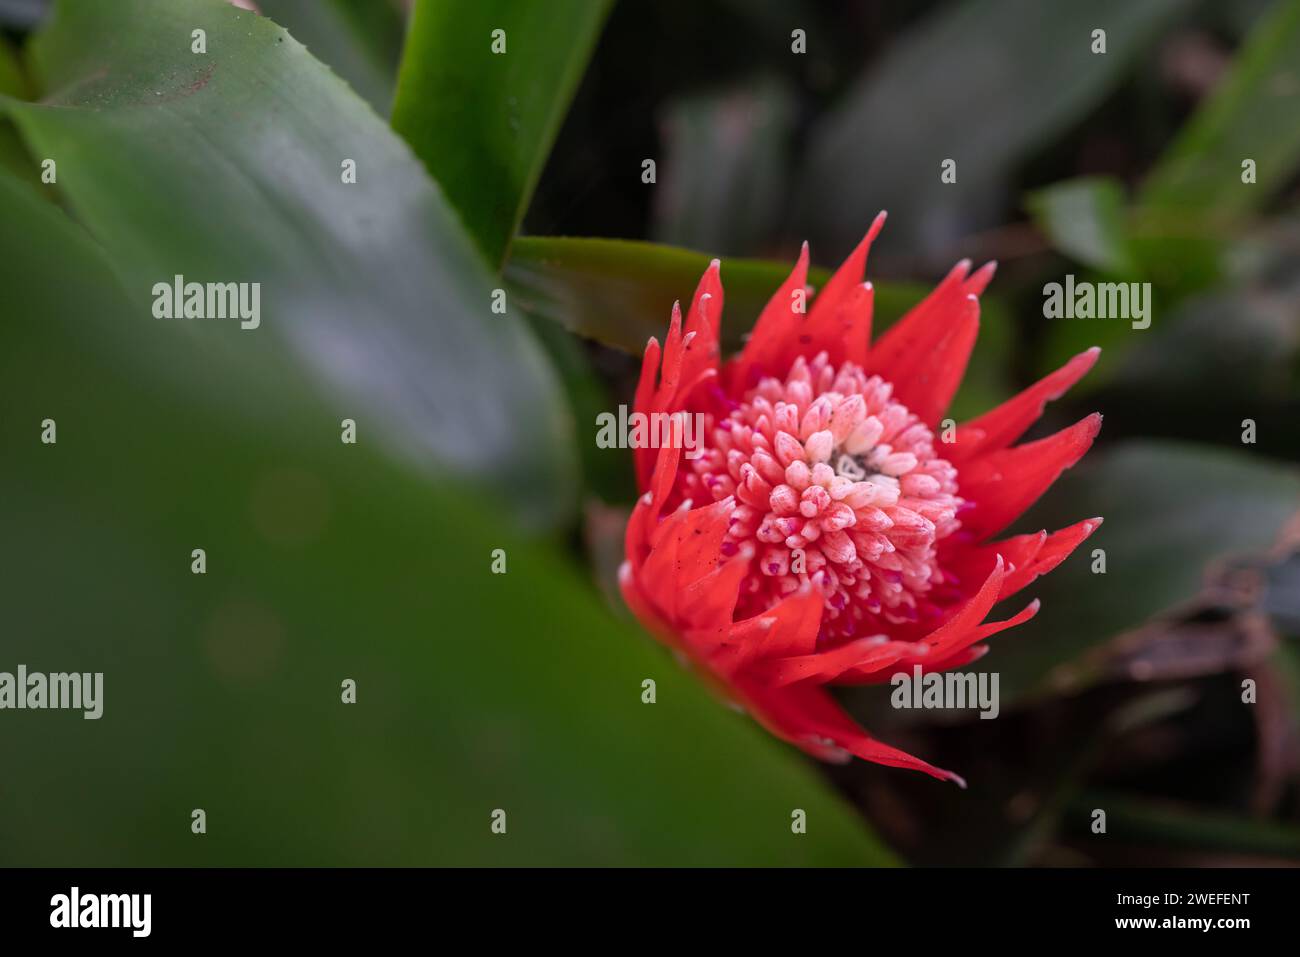 Red flower on green leaves background. Foolproof plant or billbergia pyramidalis Stock Photo